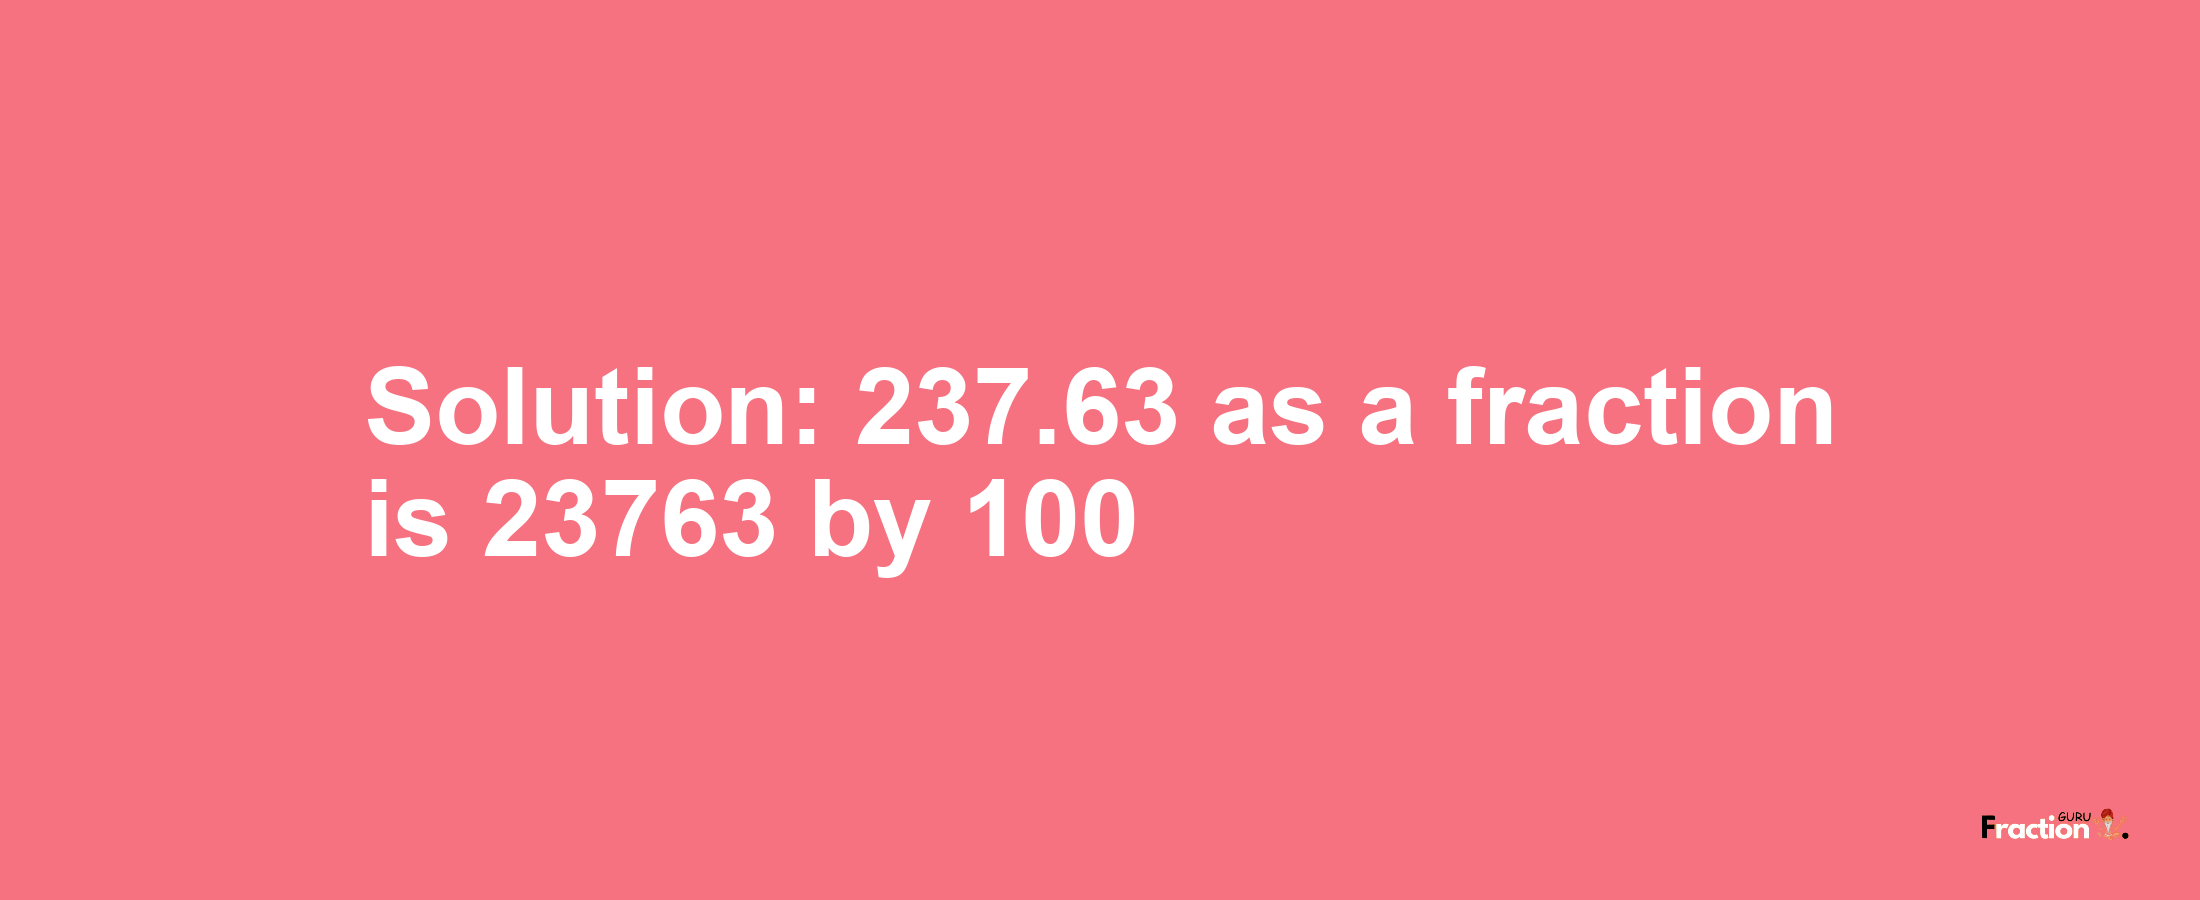 Solution:237.63 as a fraction is 23763/100